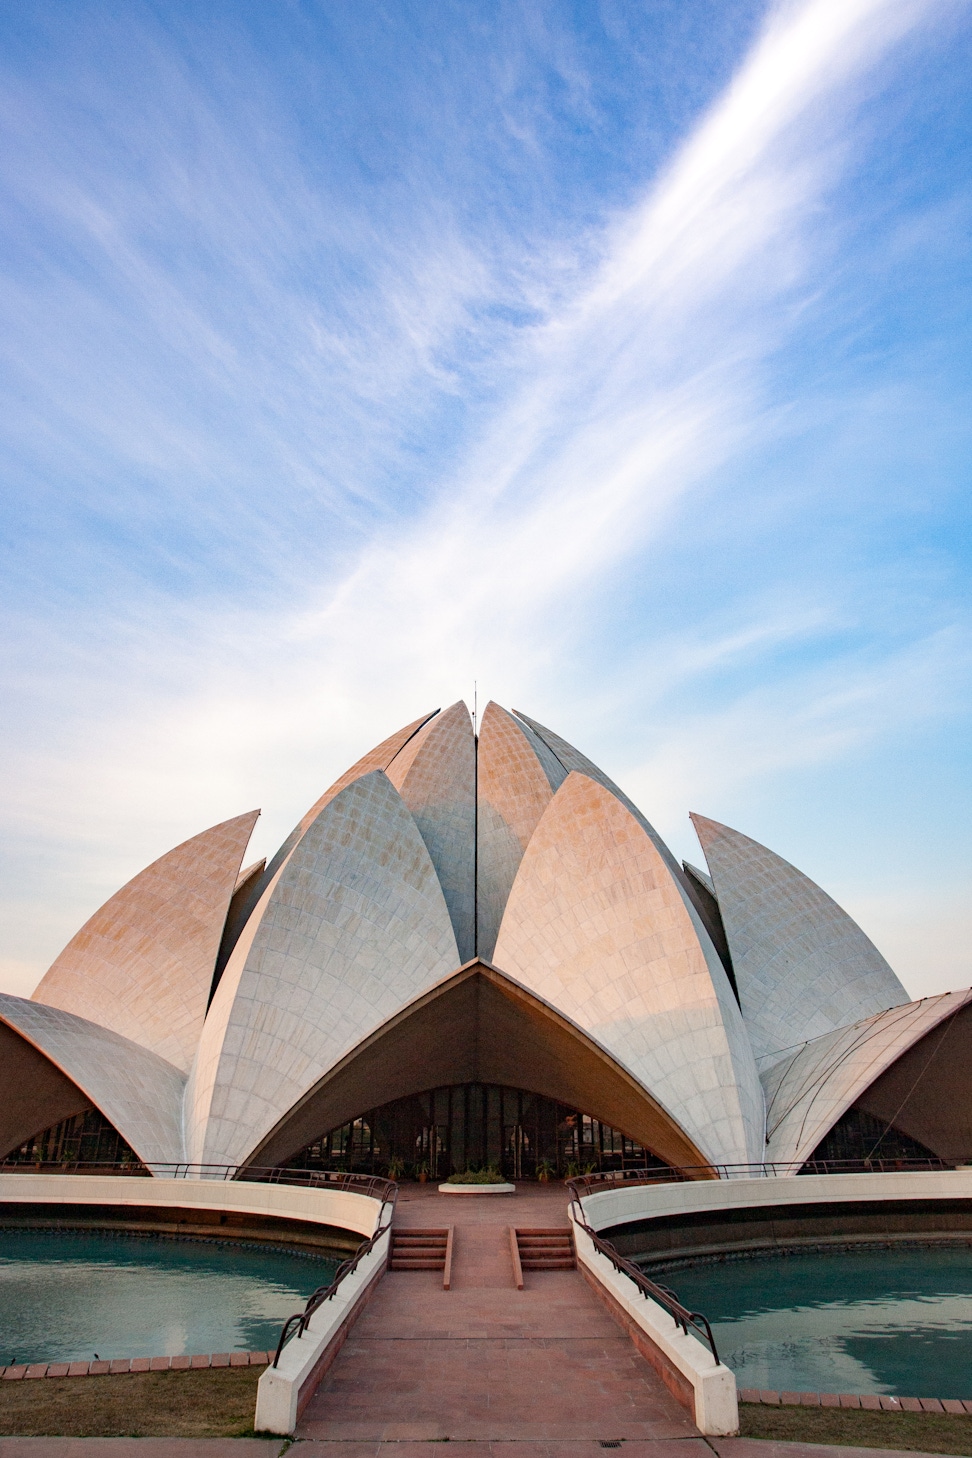 Continental Bahá’í House of Worship of the Indian Subcontinent (New Delhi, India)